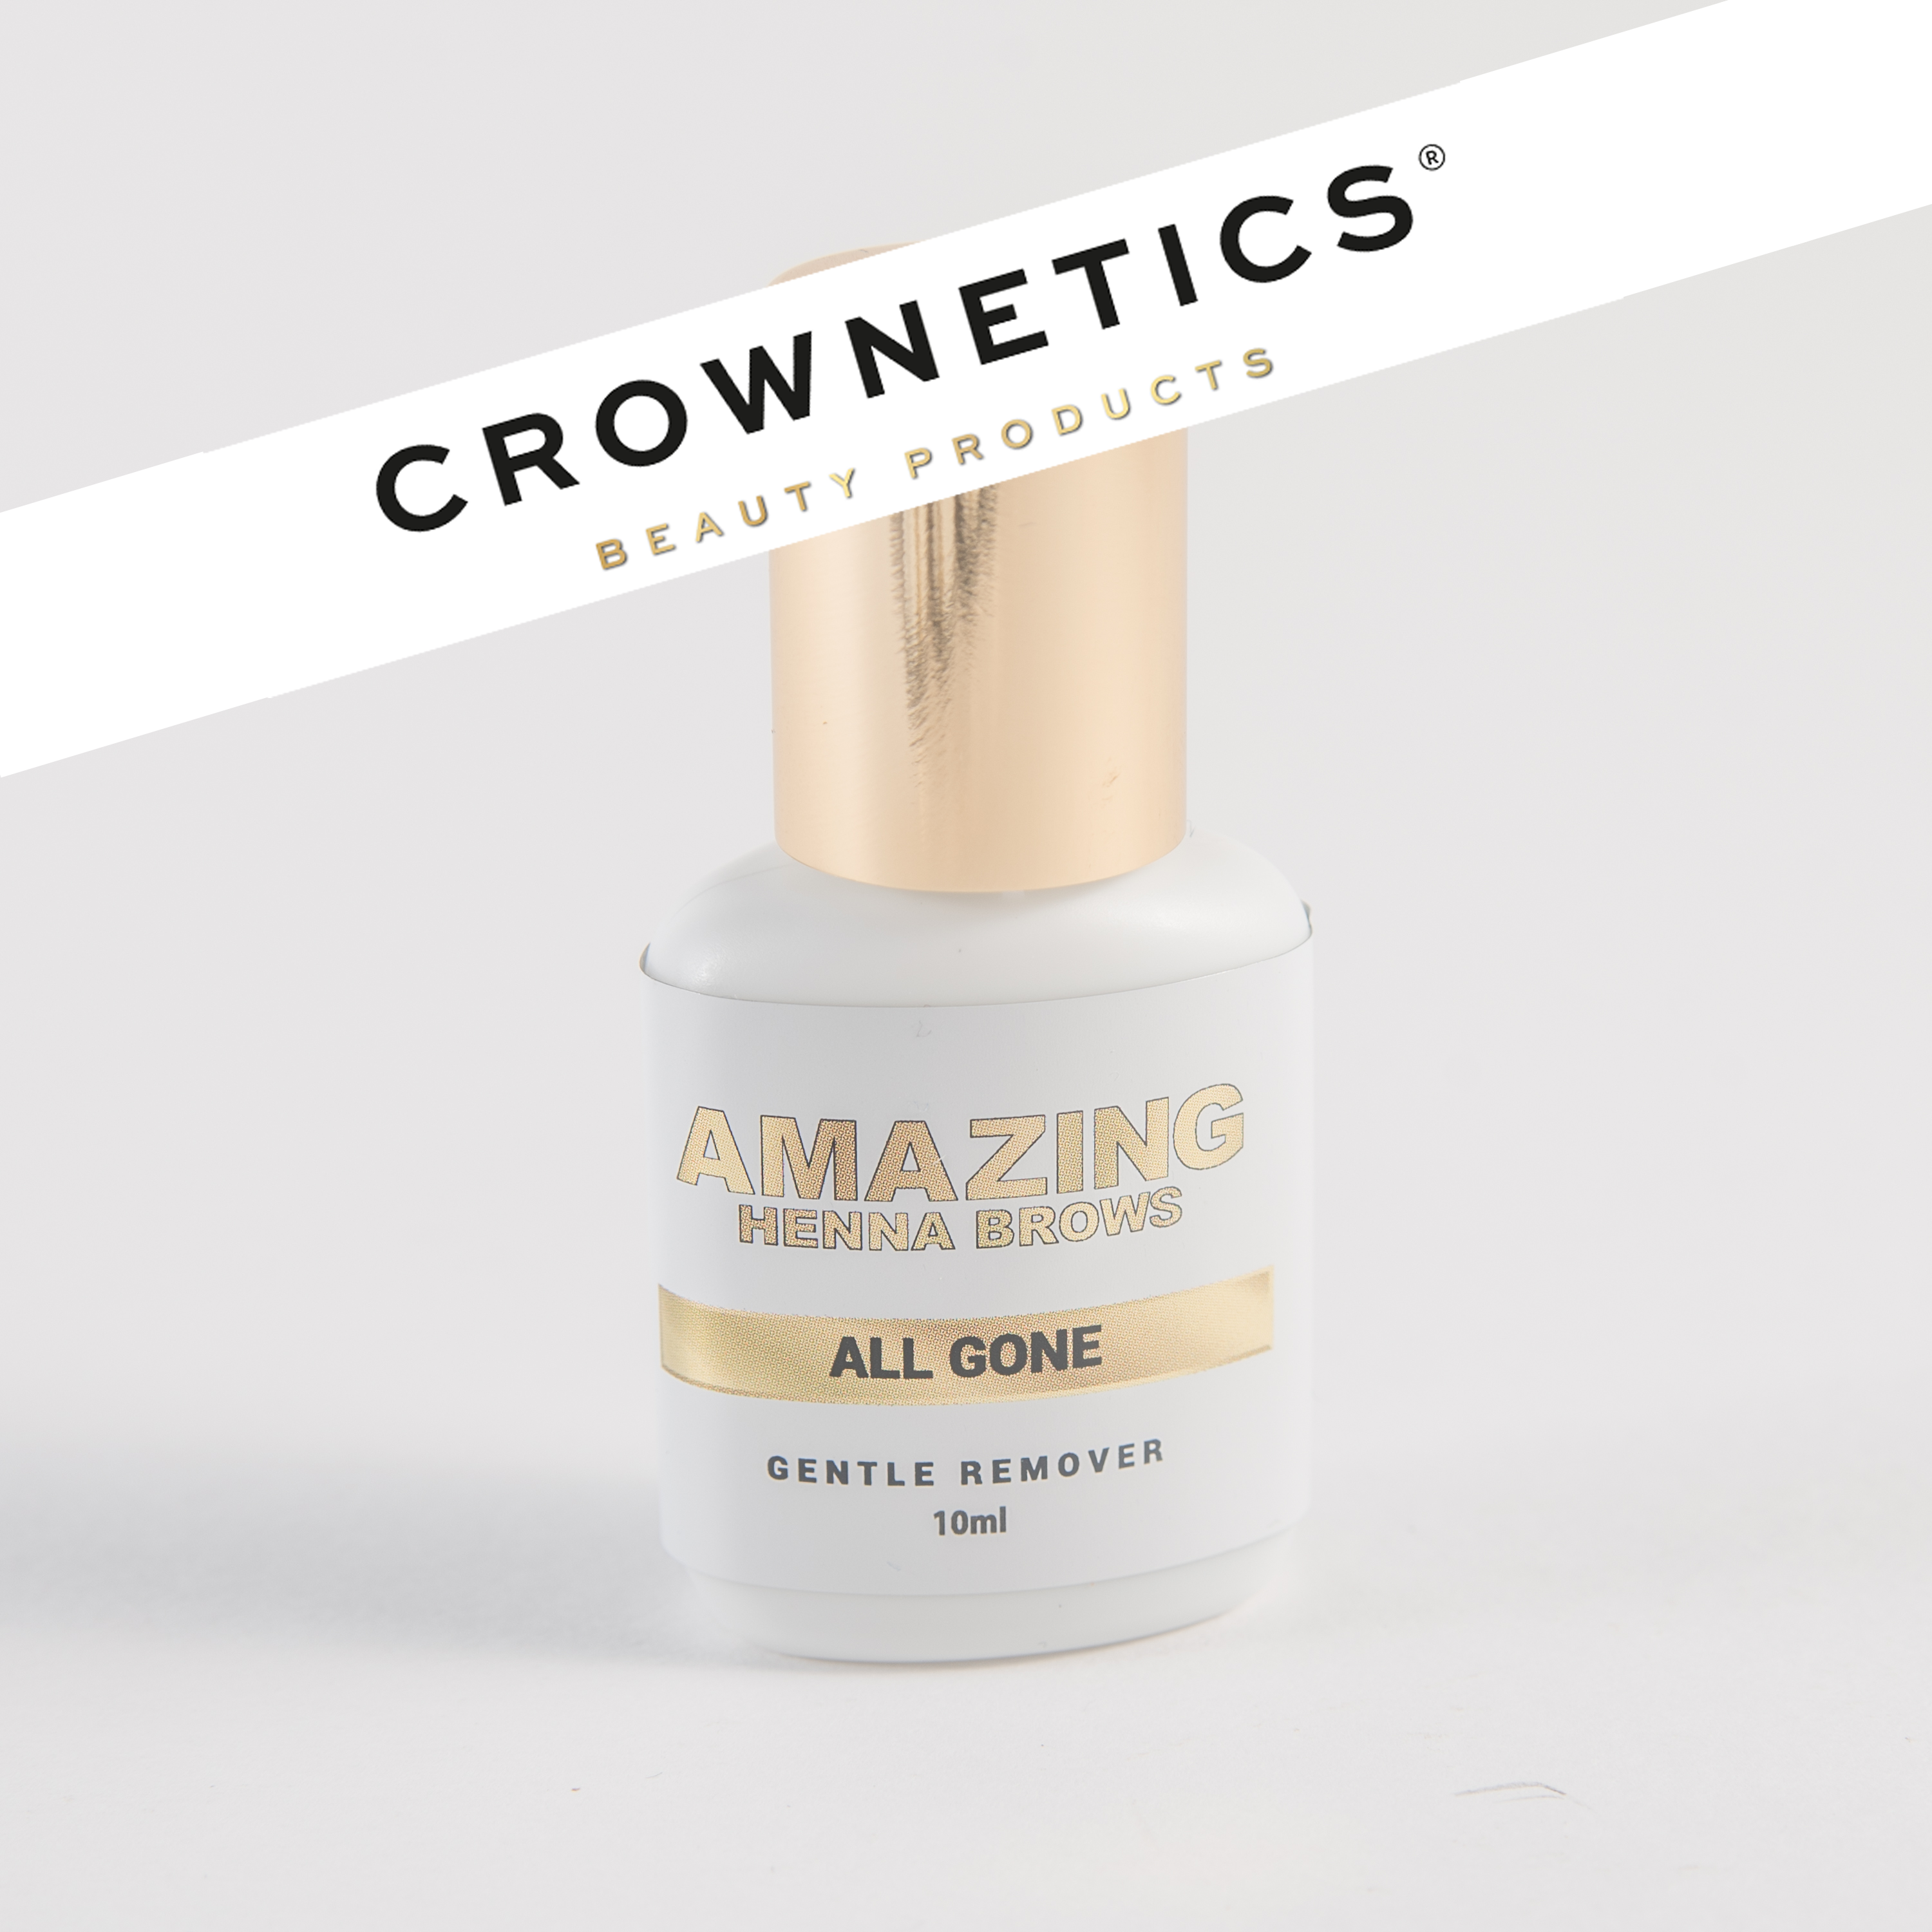 Amazing Henna Brows 'All Gone' Gentle Remover